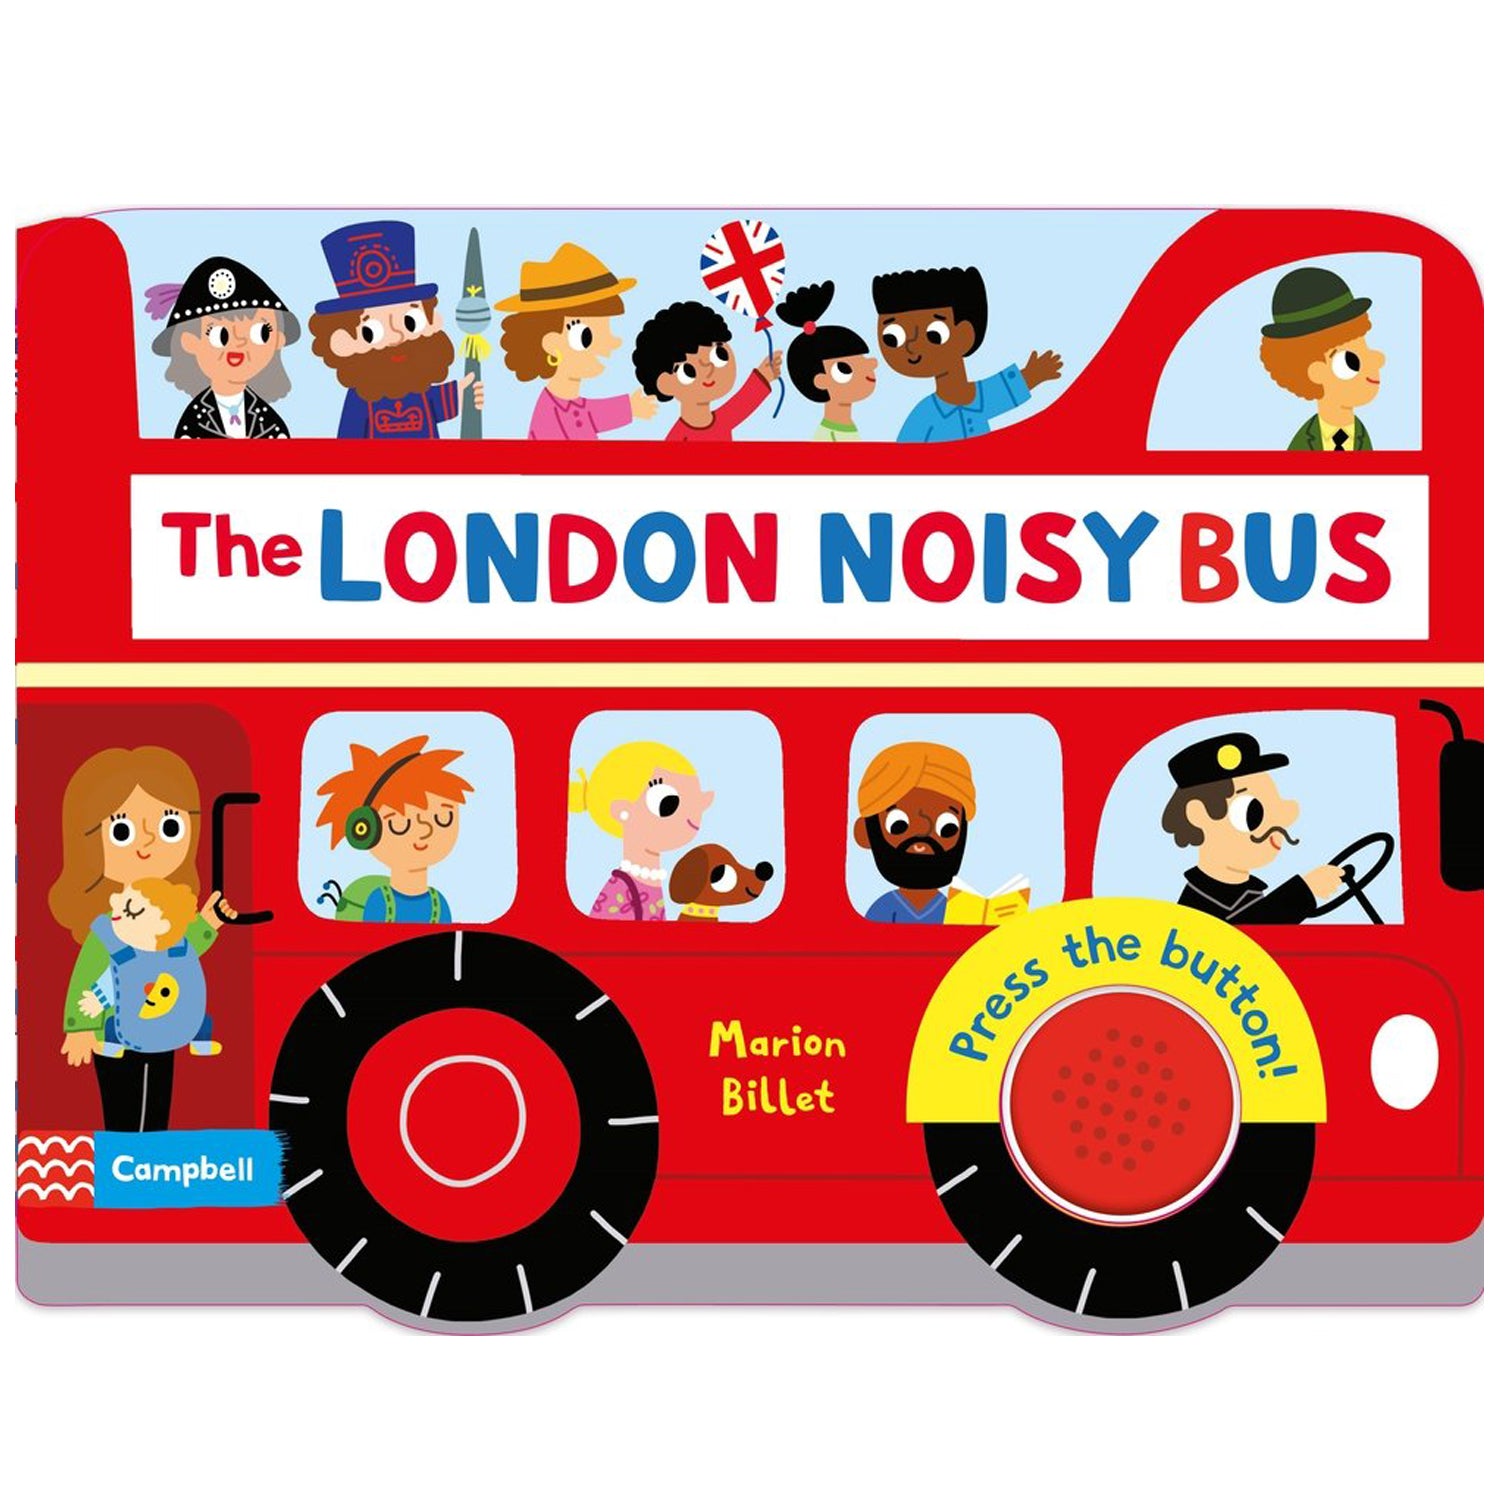 The London Noisy Bus Book by Marion Billet